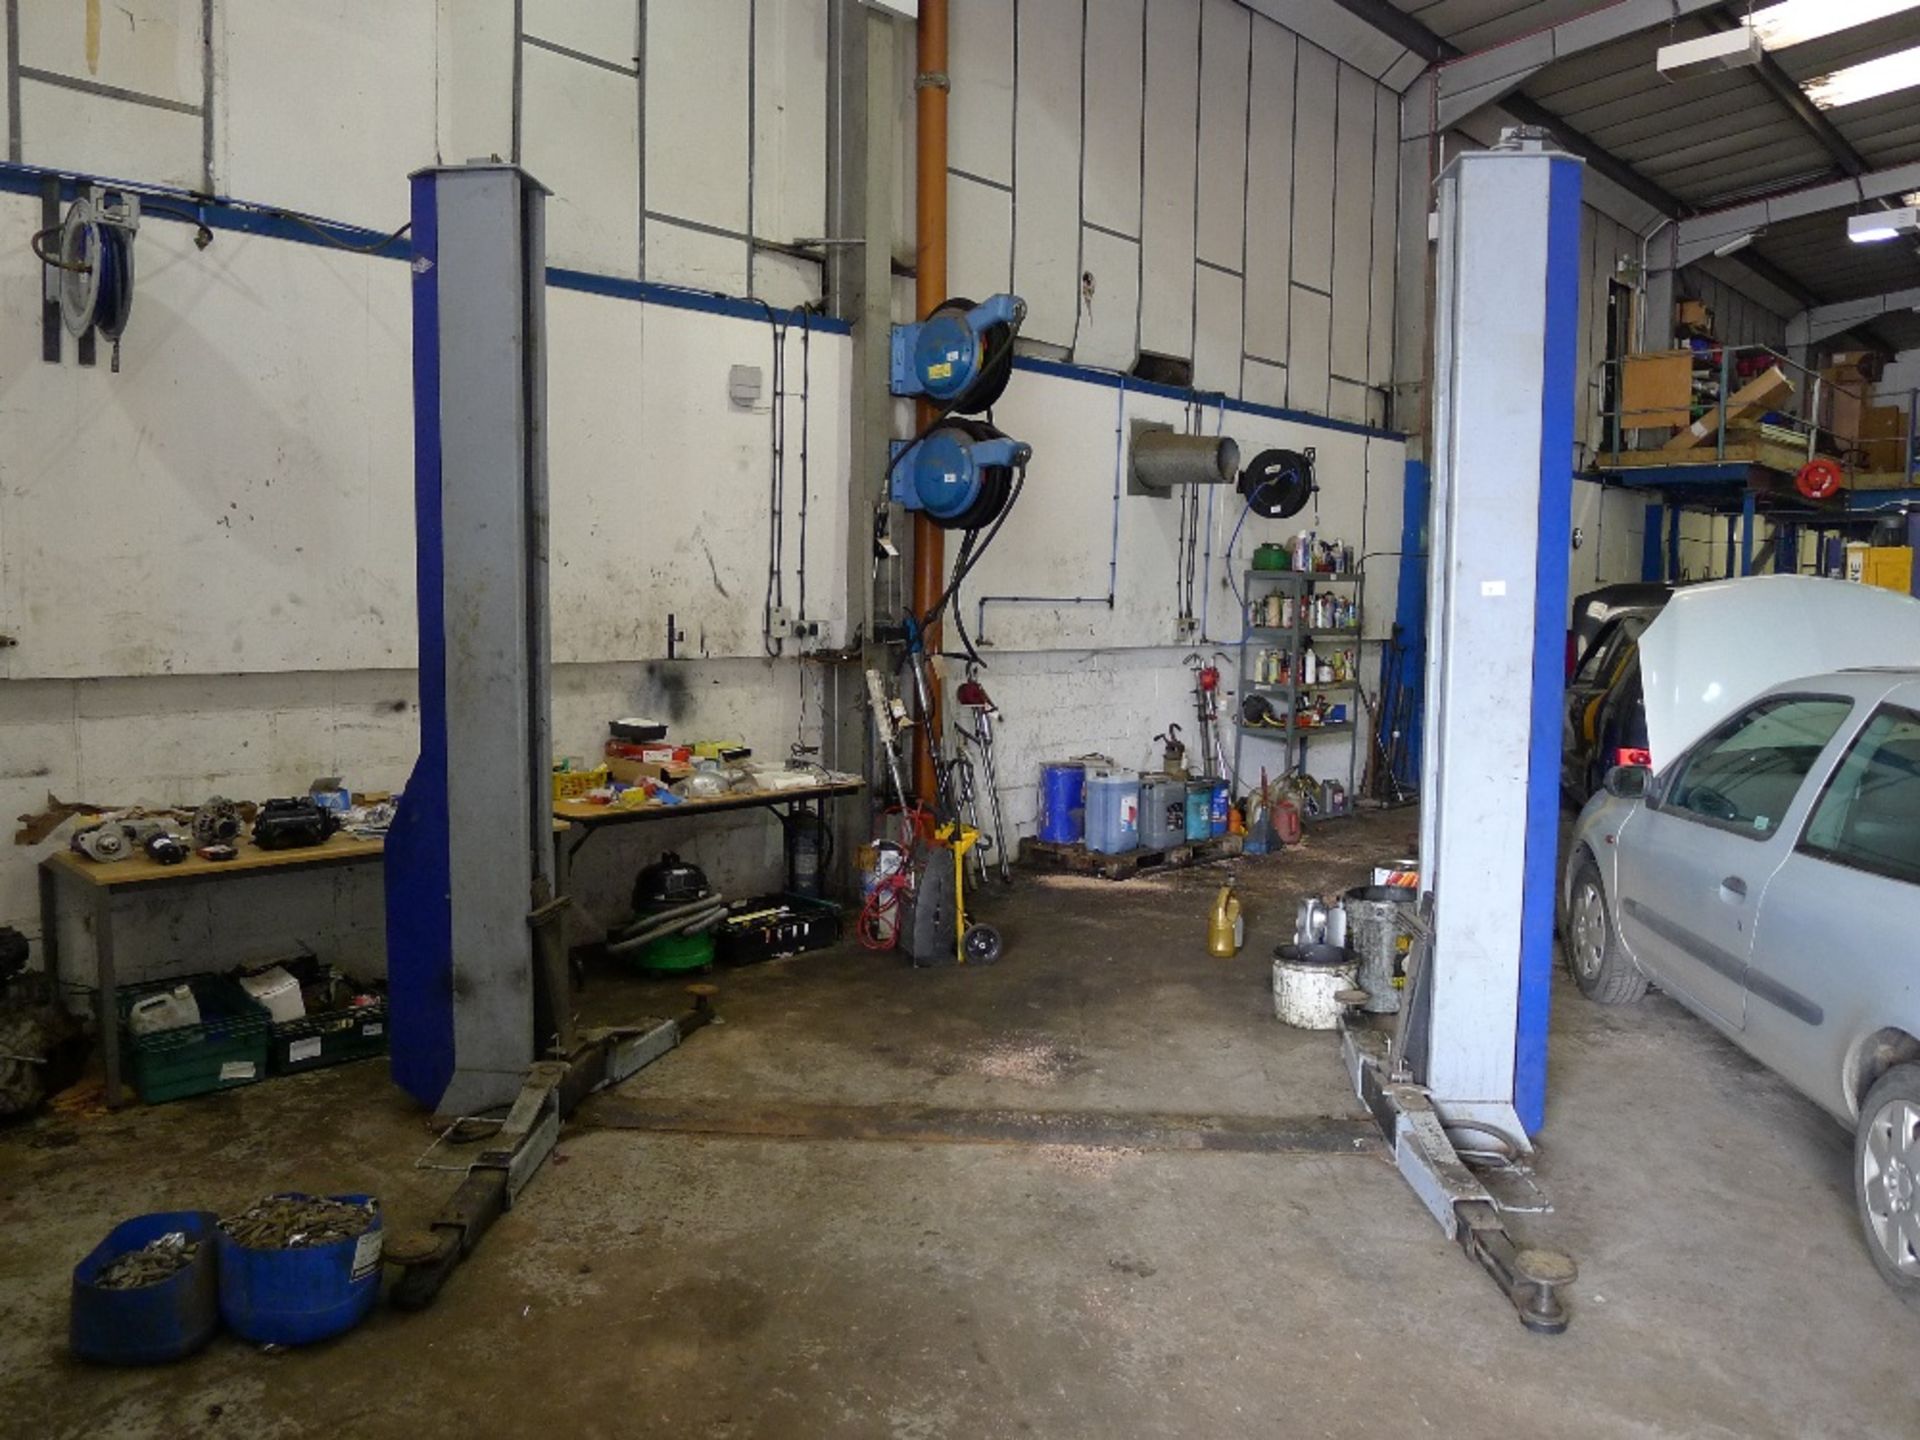 1 Tecalemit two post vehicle lift type Azur 444 9070, Capacity 3200kg, YOM 2009, 3ph supplied with 4